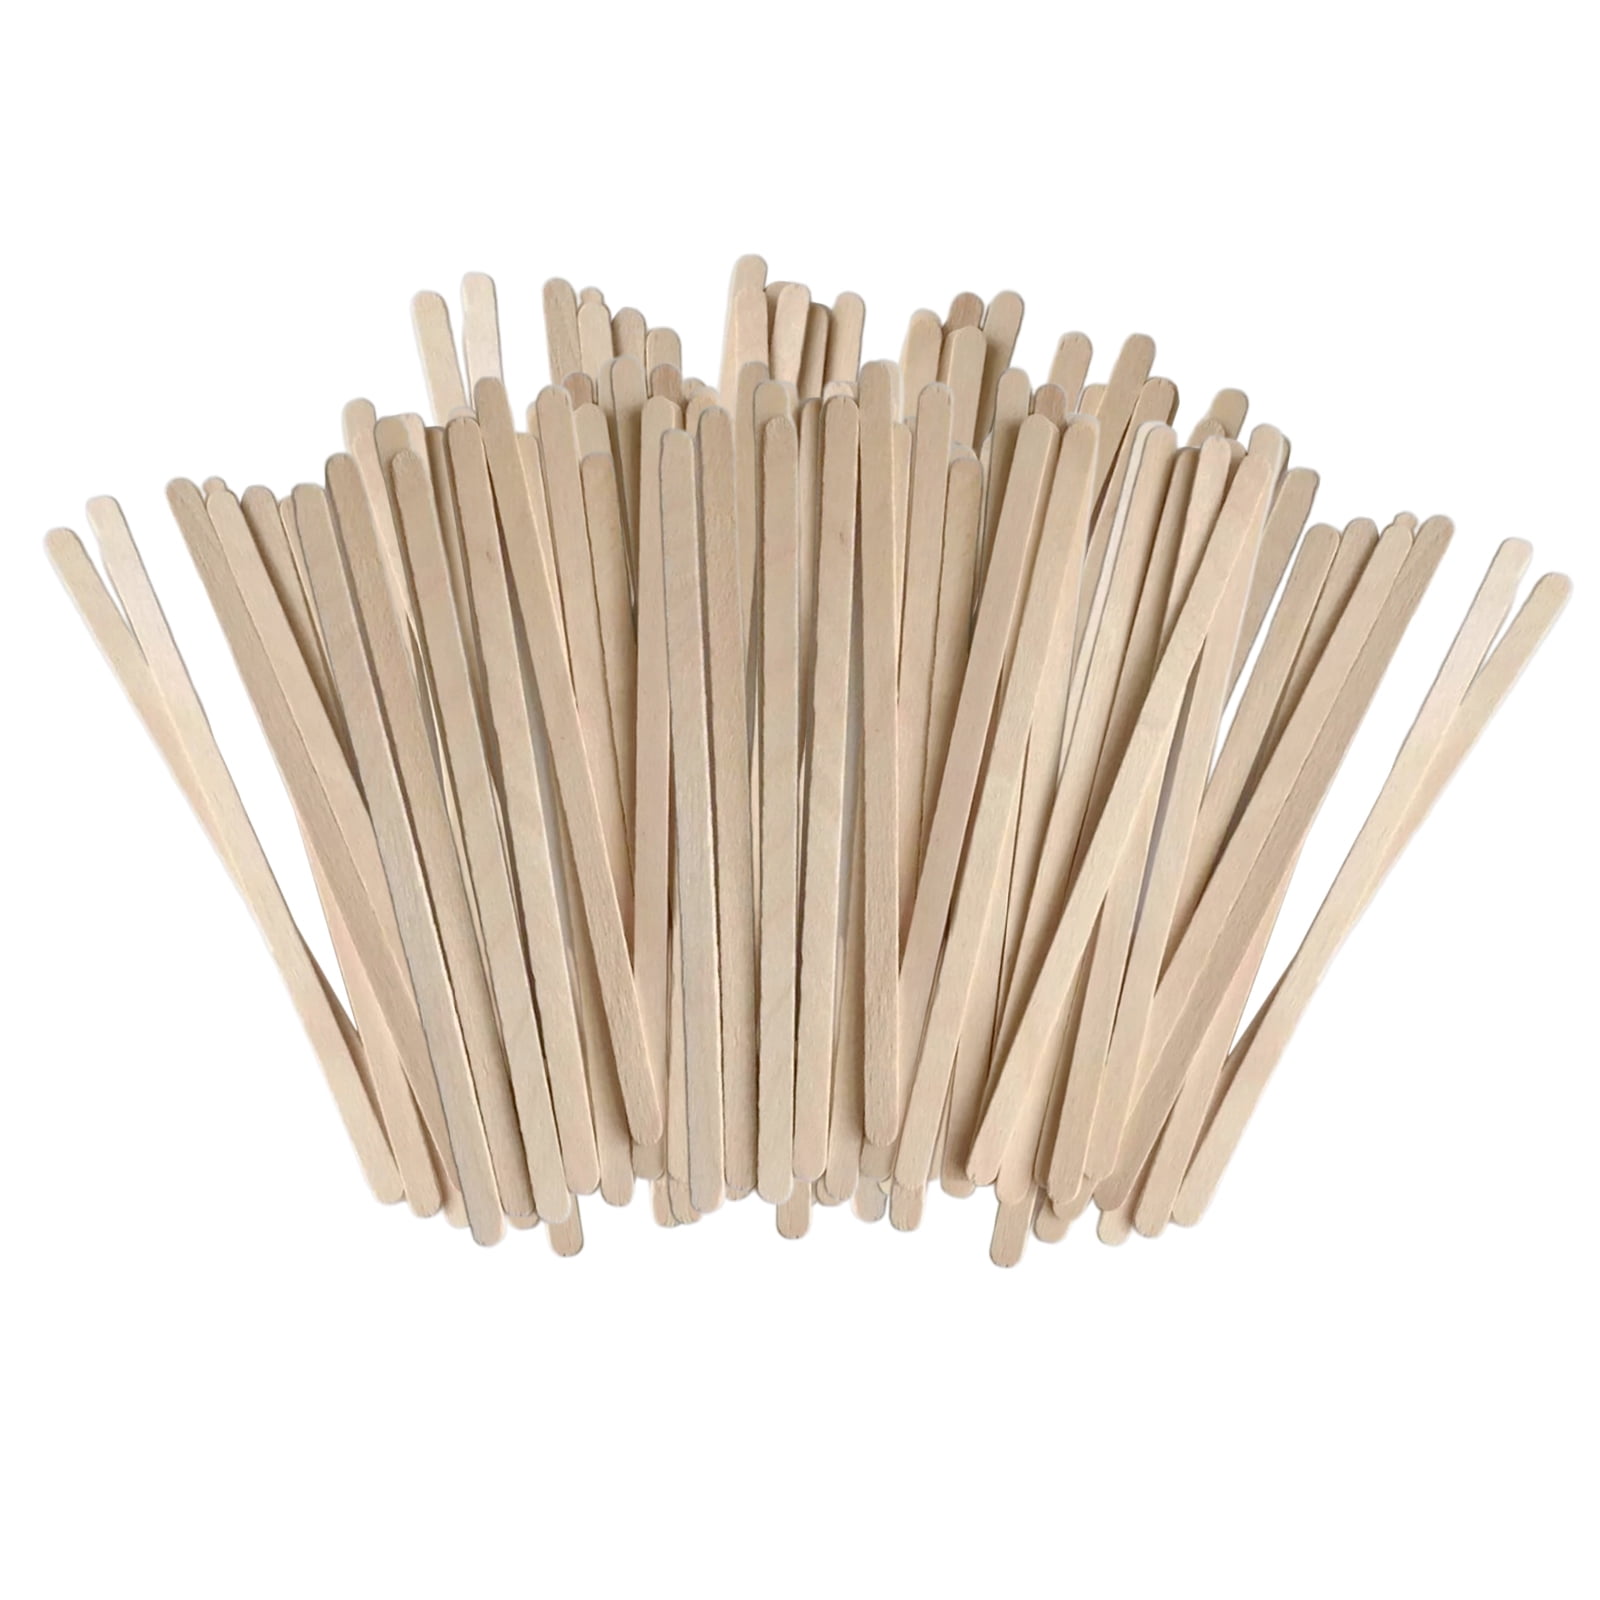 Perfect Stix Perfectware PW CS 200-2000ct Wooden Coffee Stirrer with Square Ends Pack of 2000 5.5 